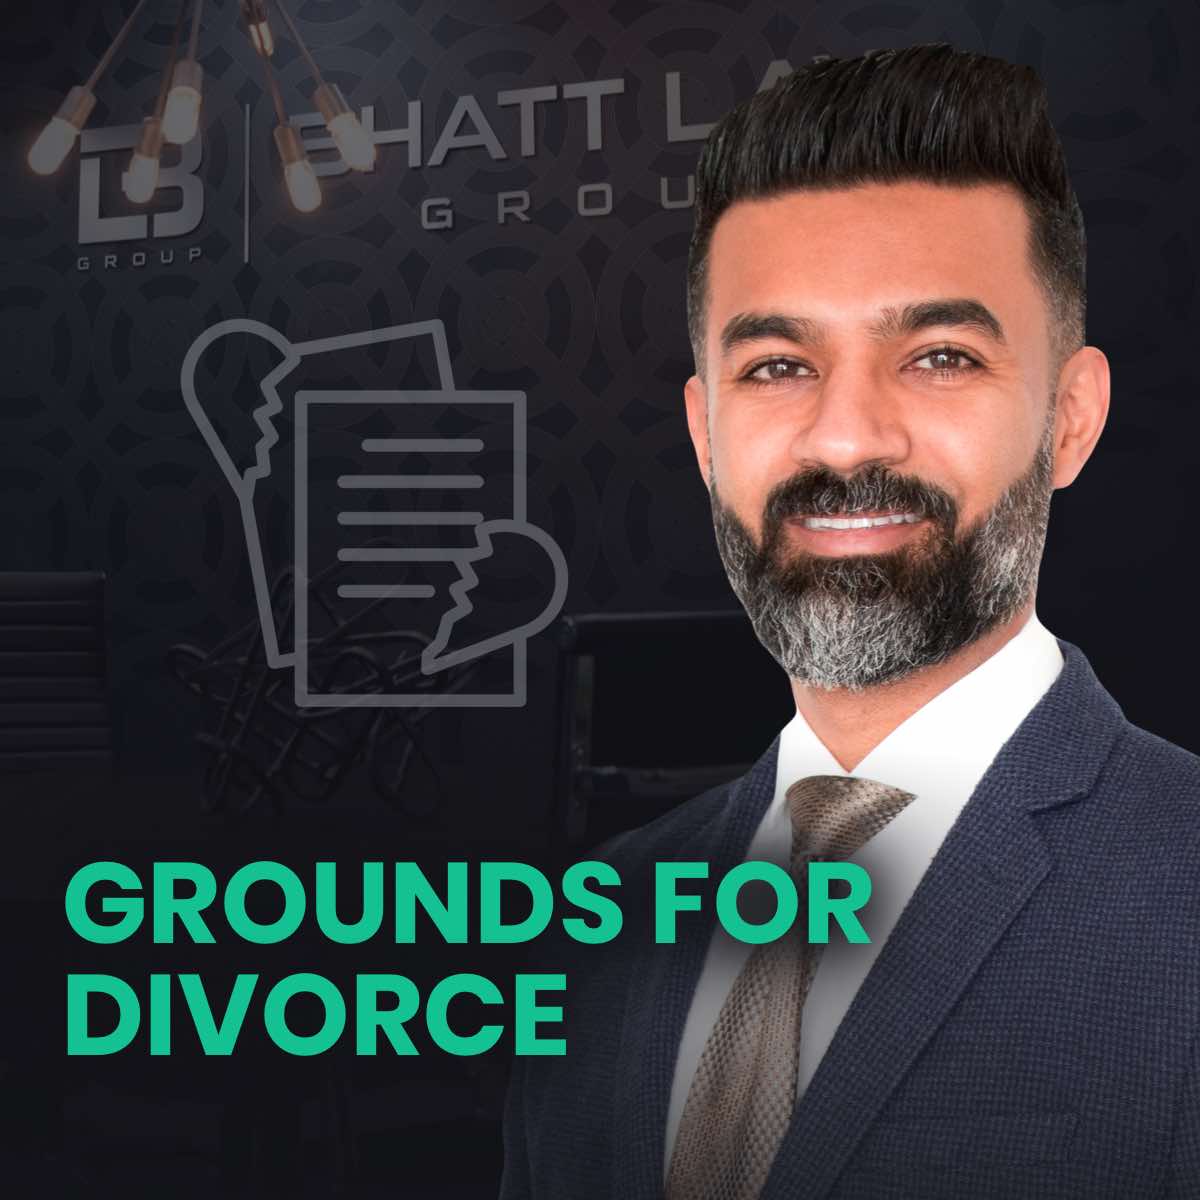 Jersey City Divorce Attorney - Grounds for Divorce